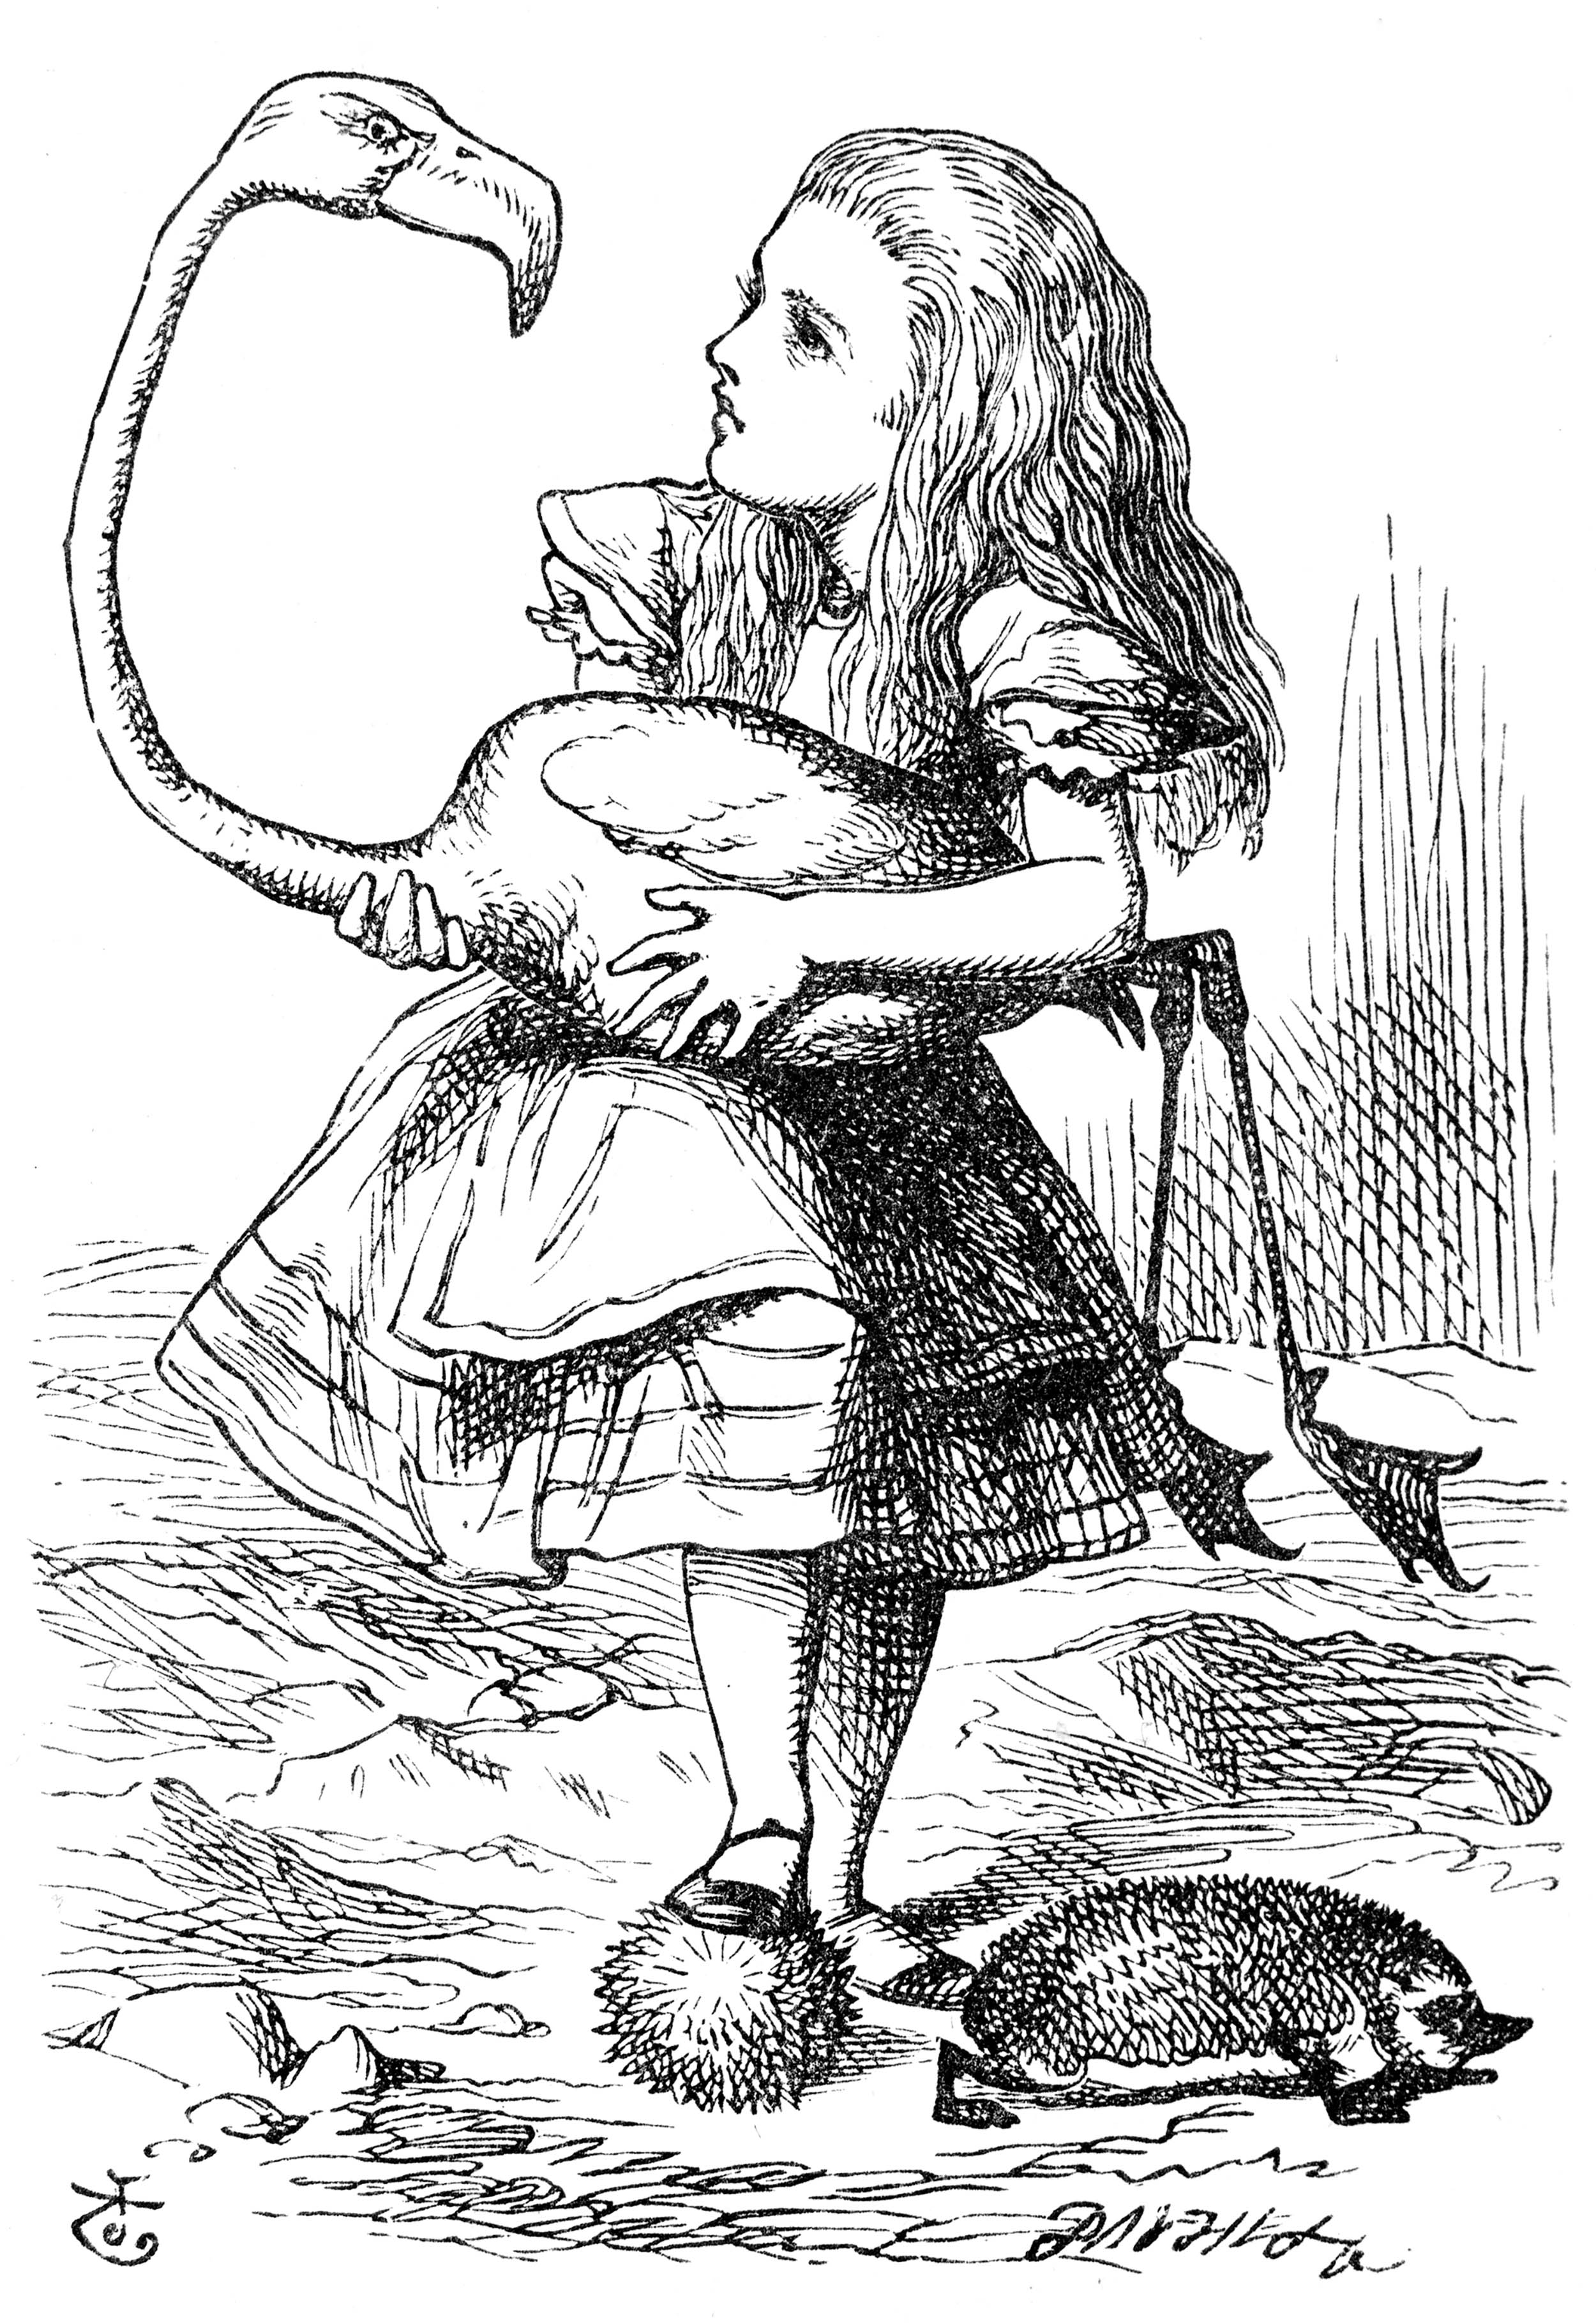 John Tenniel illustration from Lewis Carroll’s Alice’s Adventures in Wonderland of Alice playing croquet with a flamingo and a hedgehog (Courtesy Alice-in-Wonderland.net)